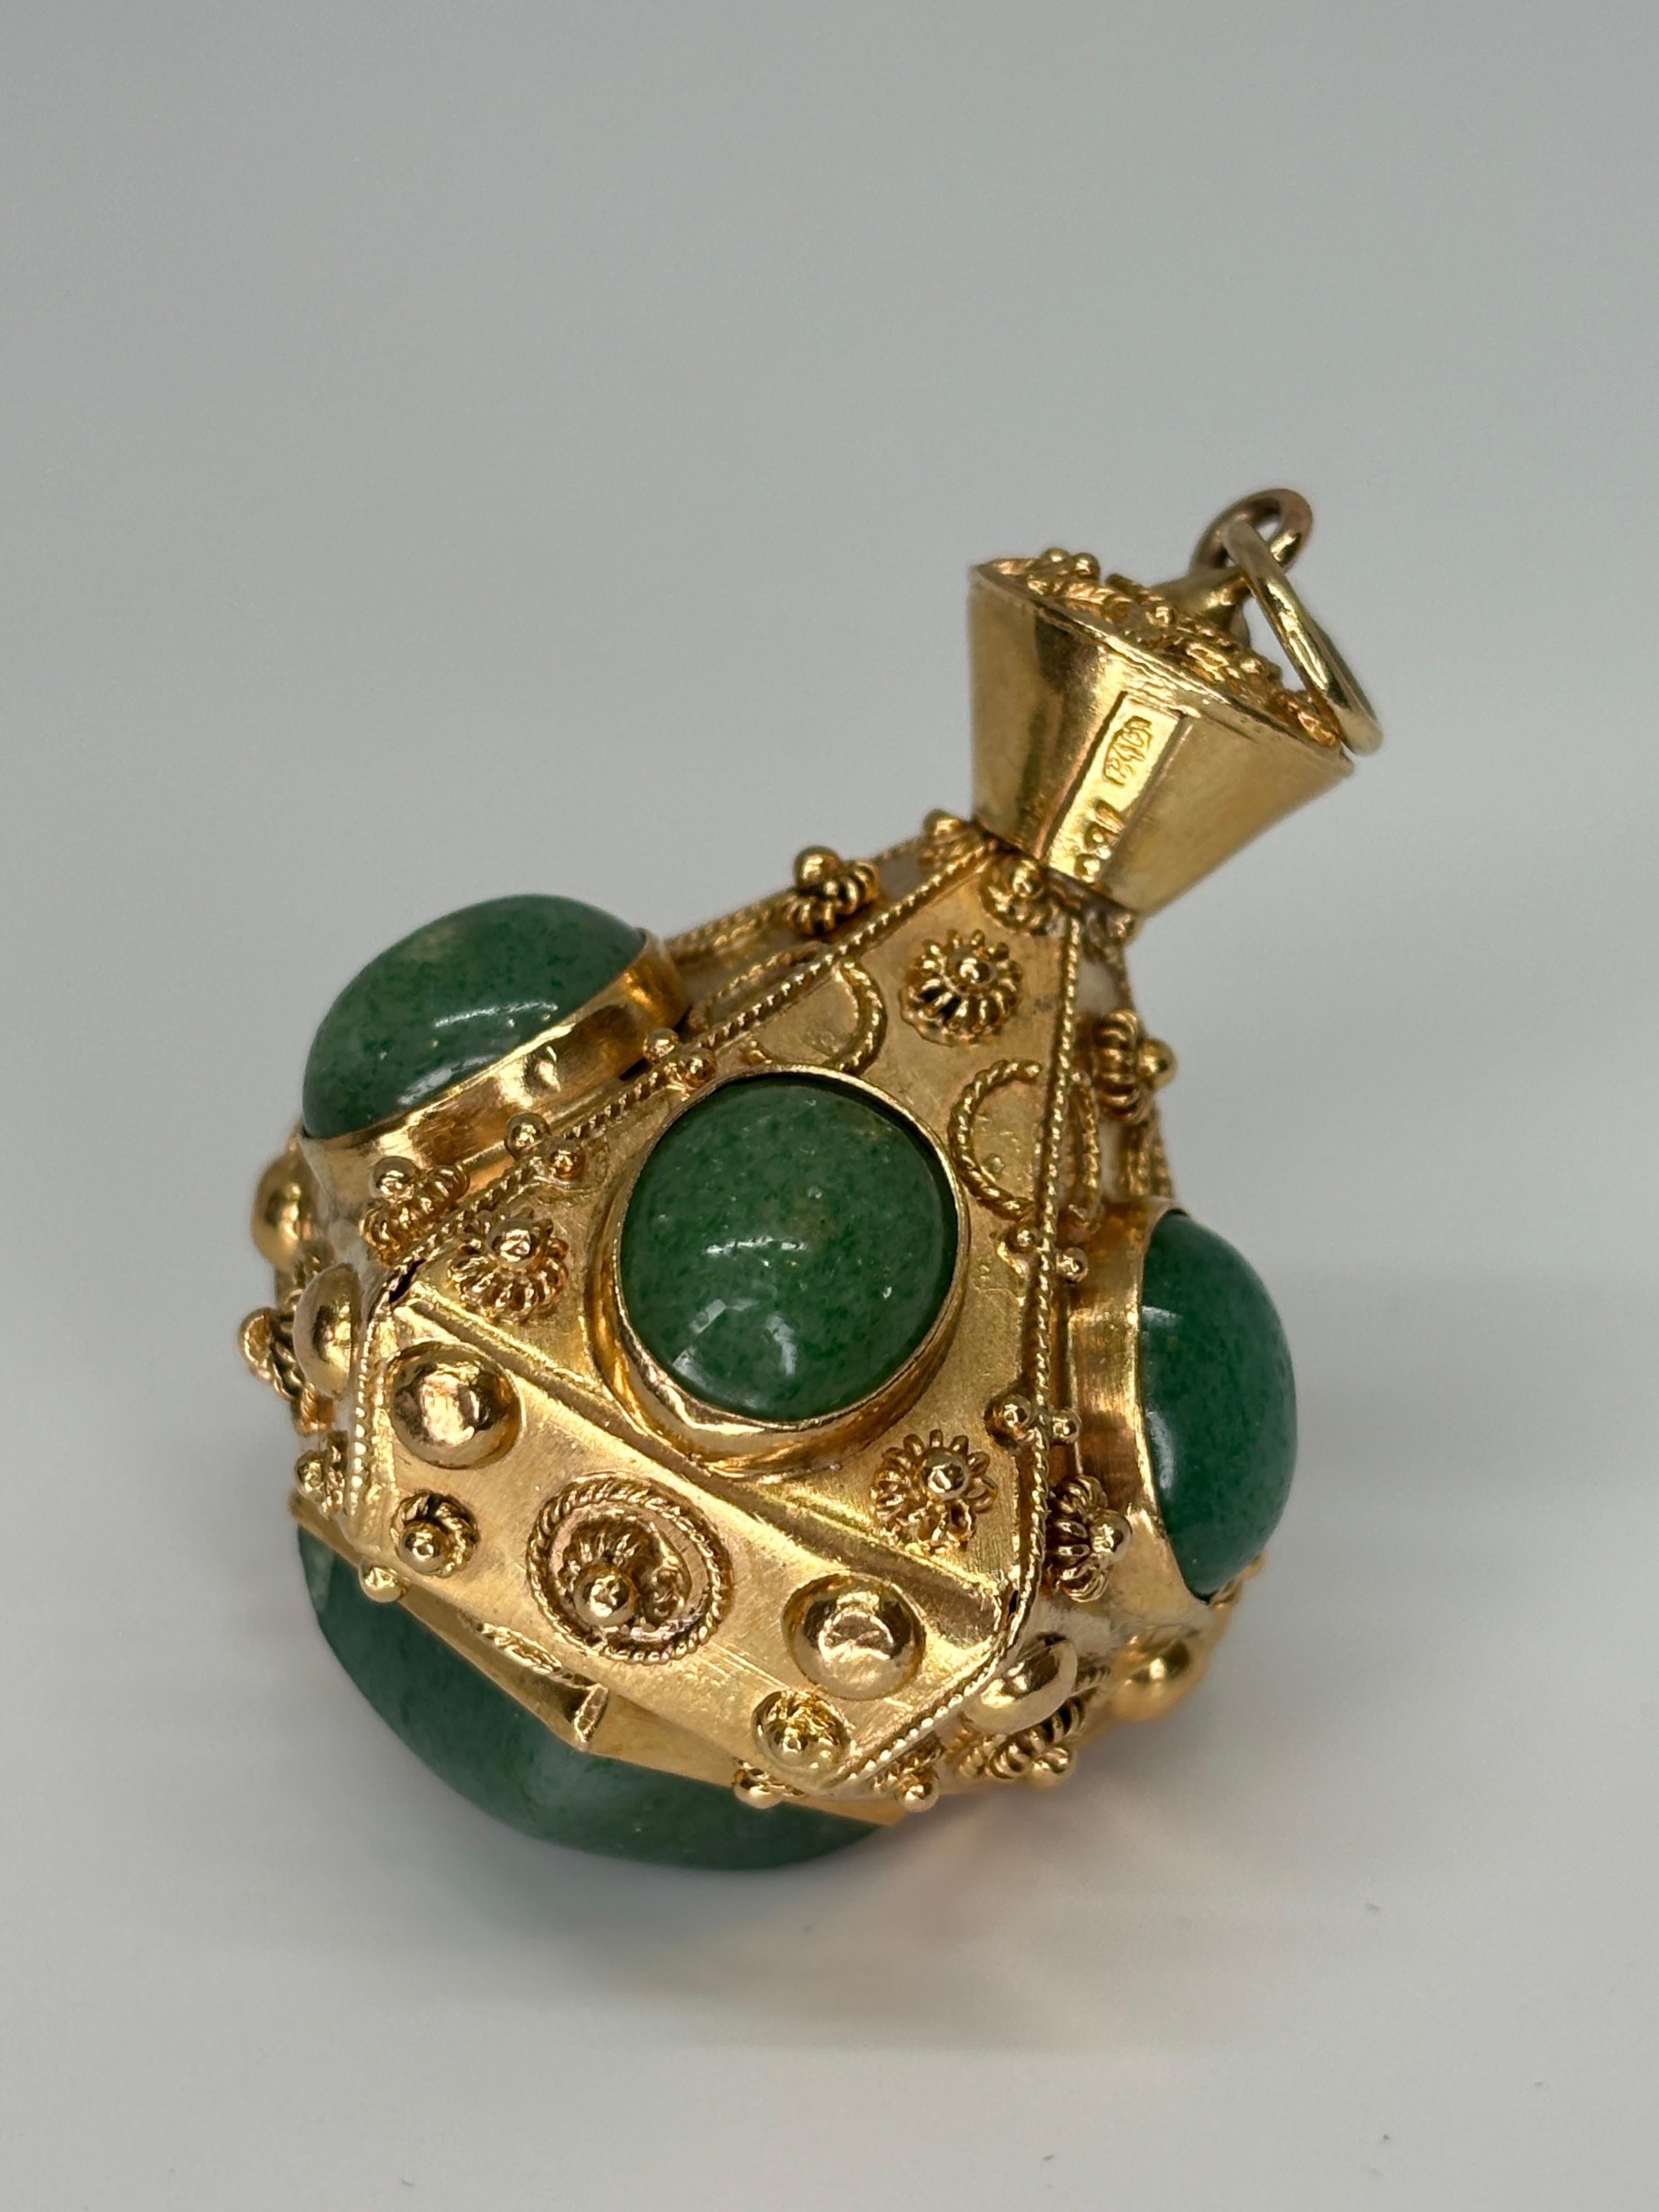 Large Italian 18k Gold Aventurine Etruscan Revival Watch Fob Pendant Charm For Sale 7